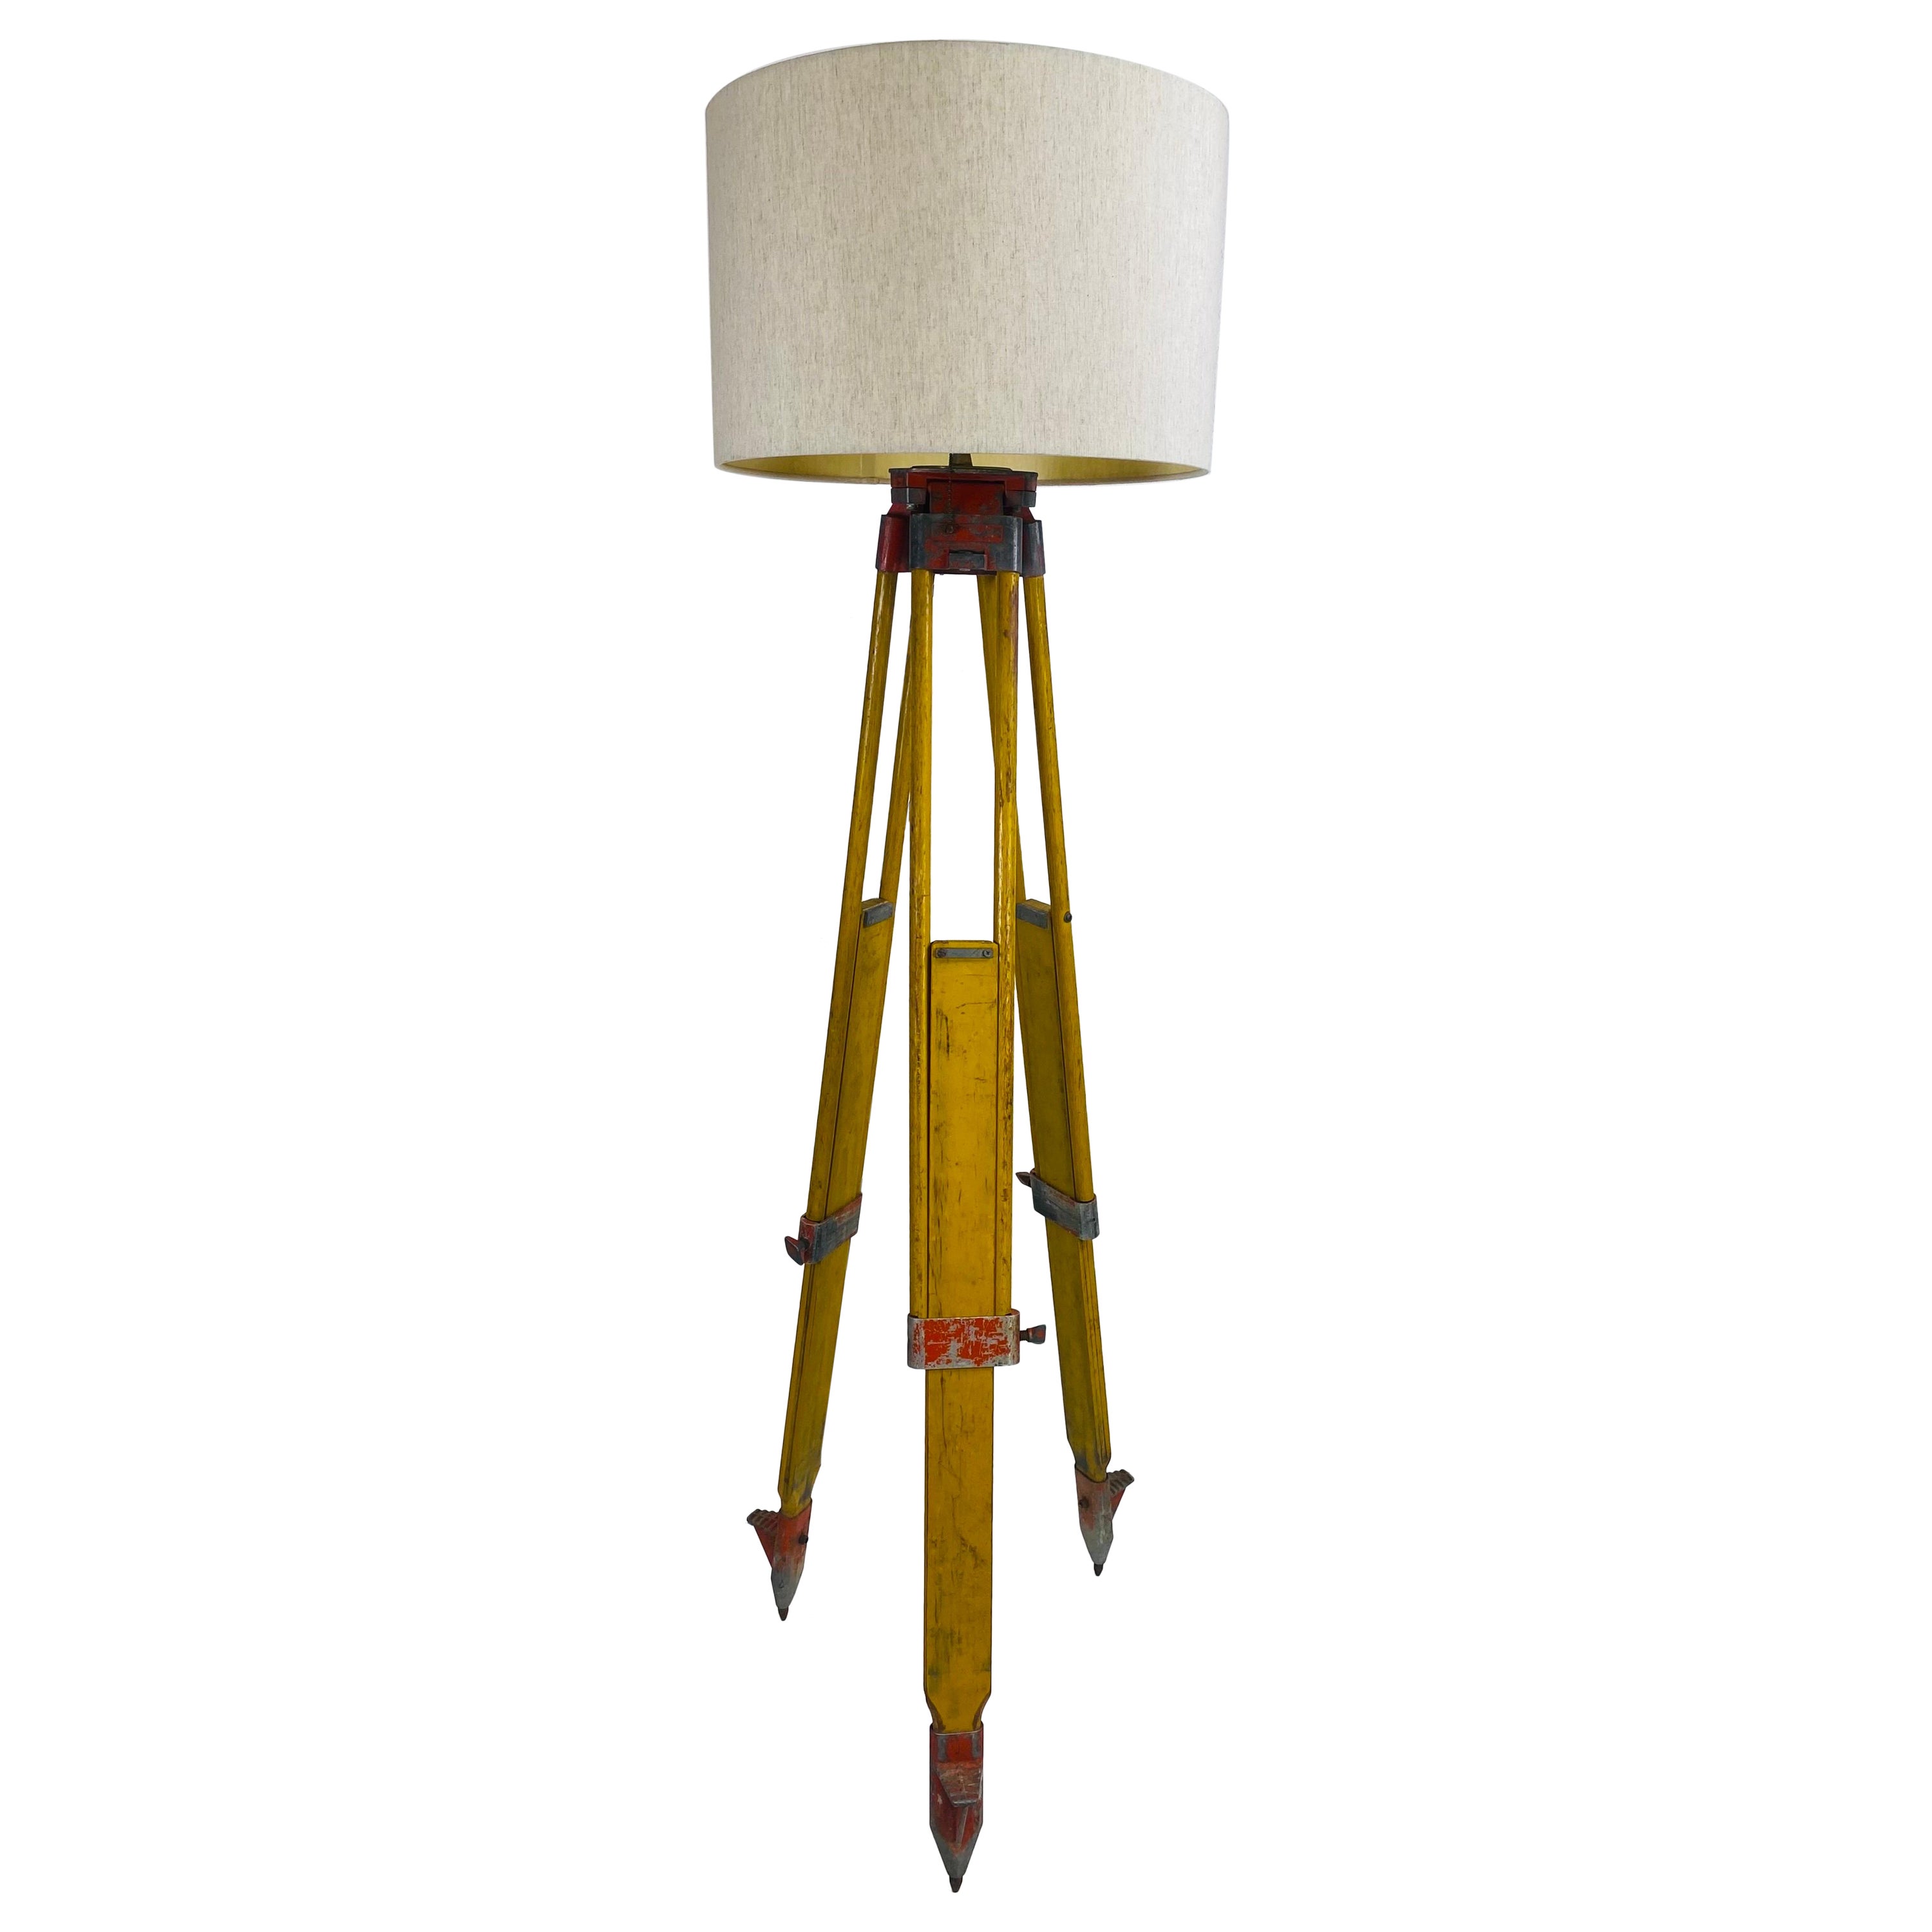 Early 20th century rustic surveyors tripod floor lamp For Sale